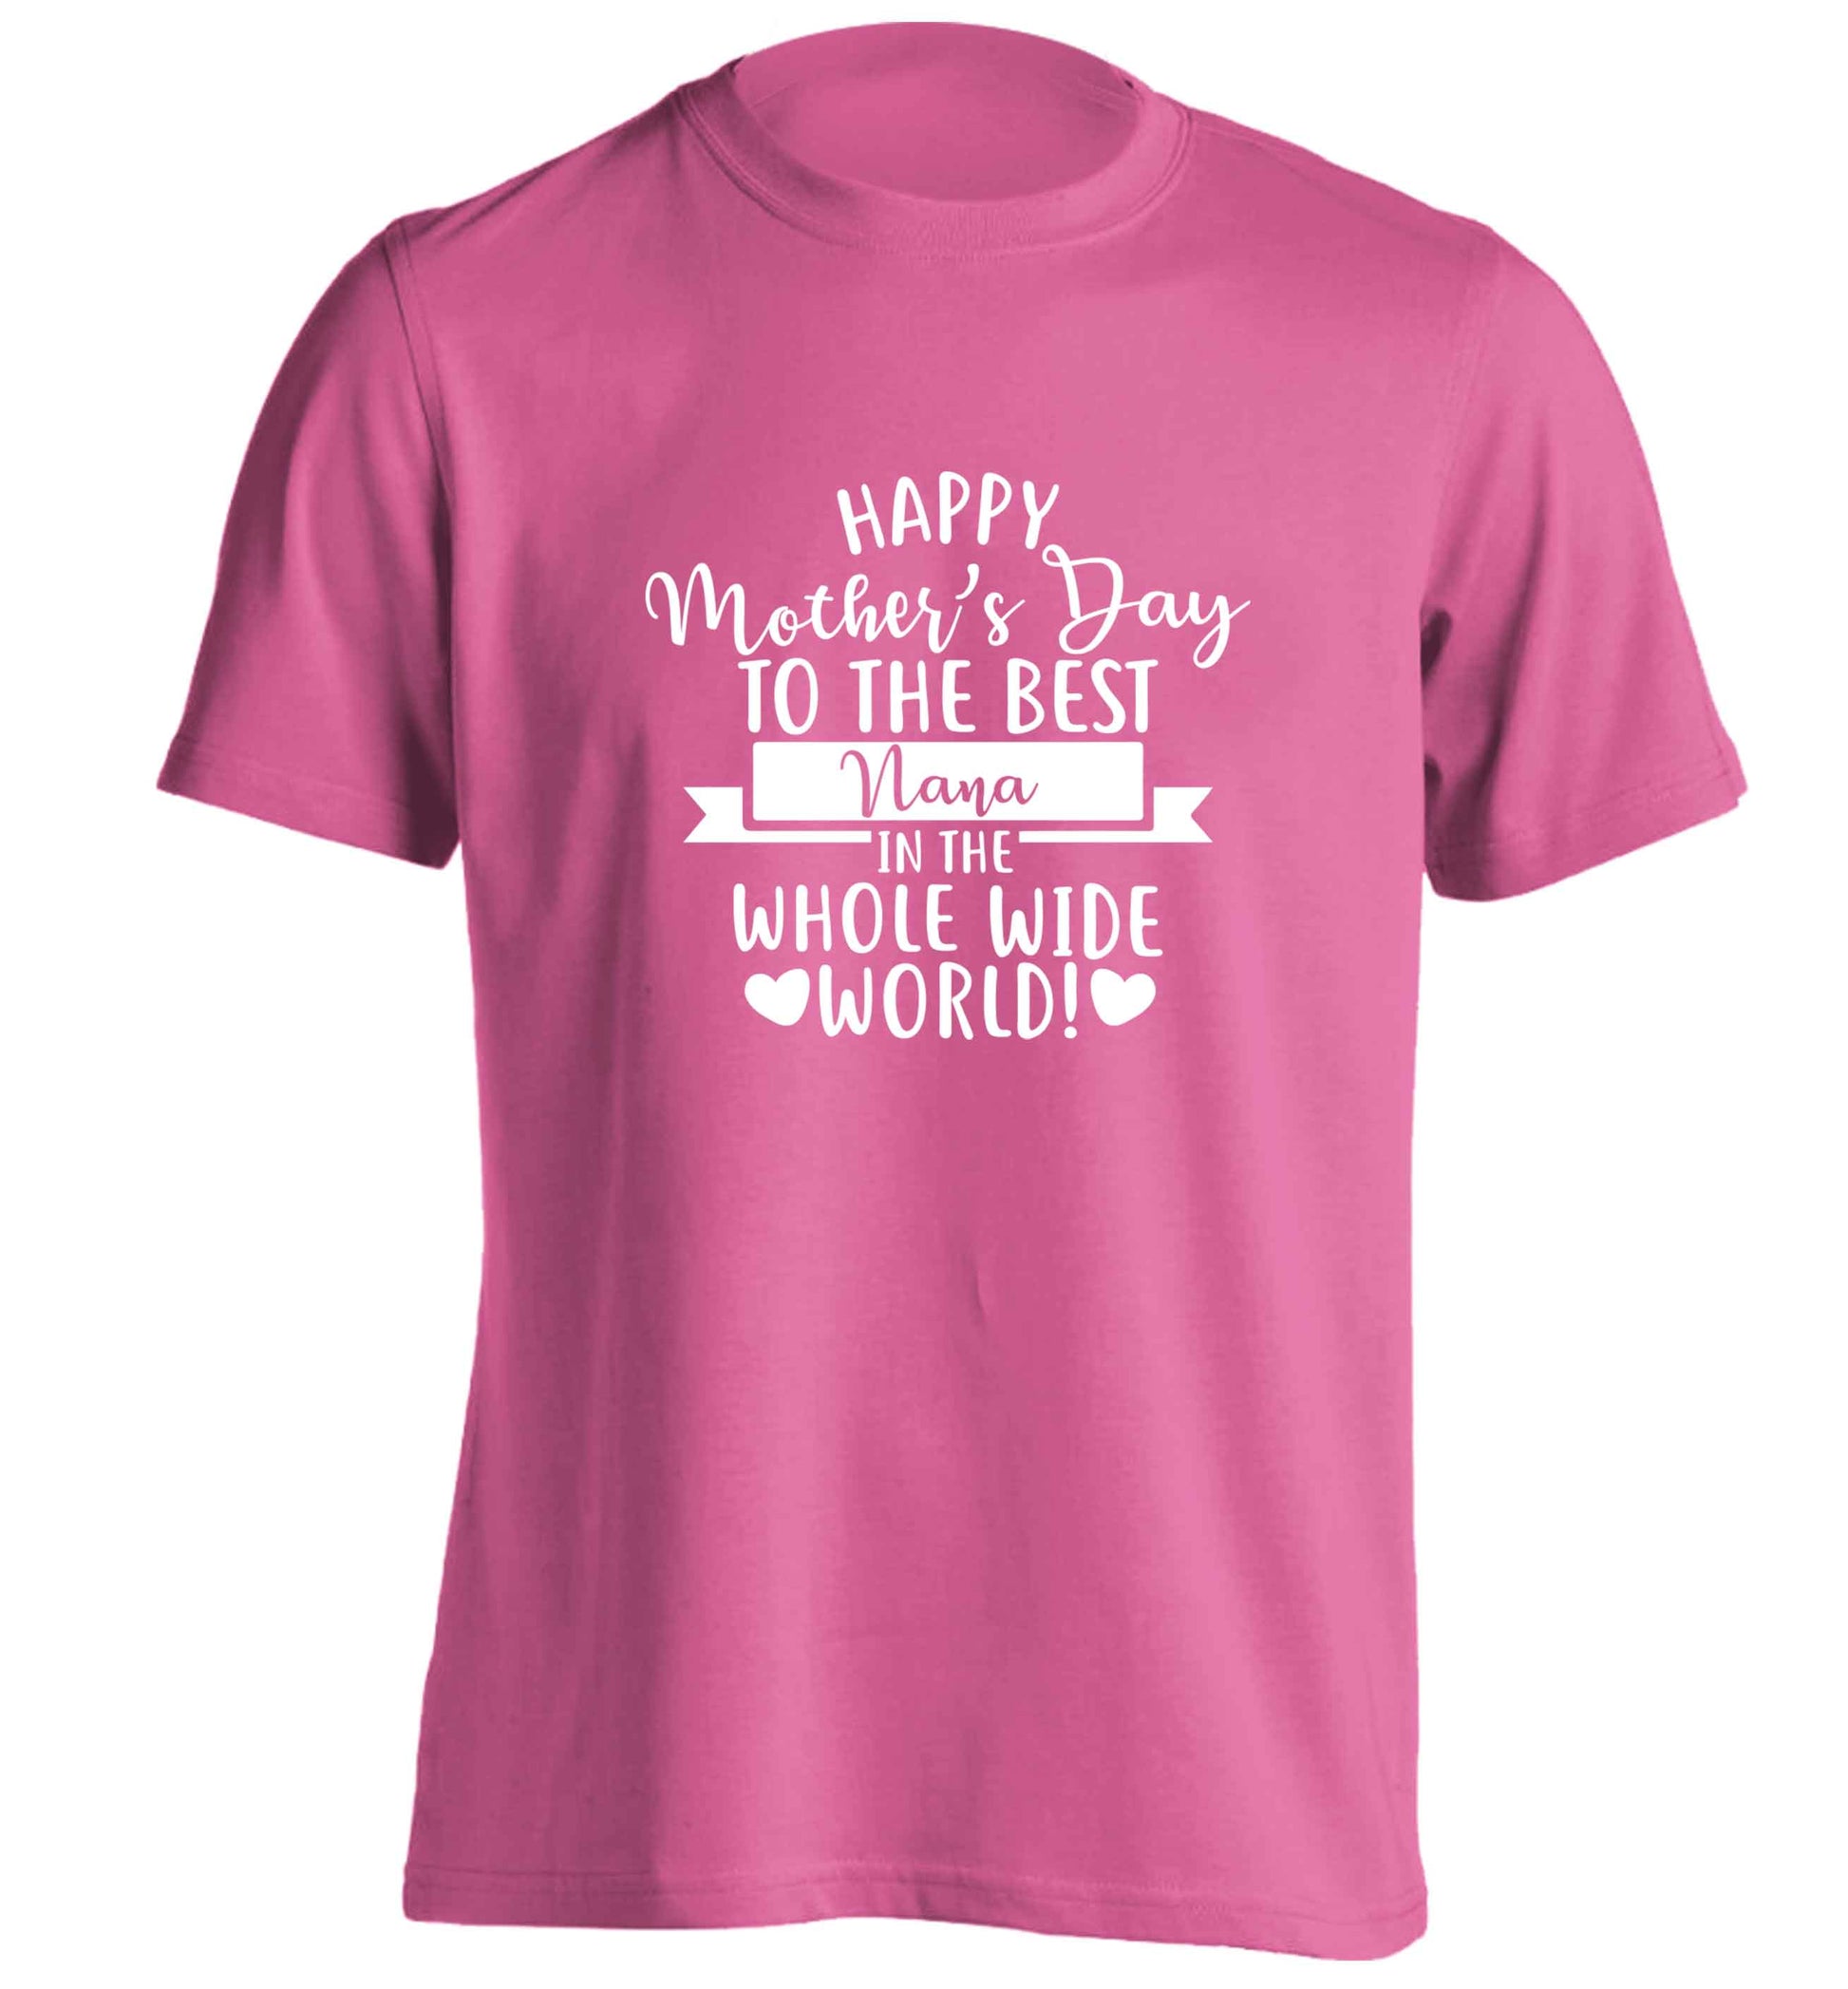 Happy mother's day to the best nana in the world adults unisex pink Tshirt 2XL